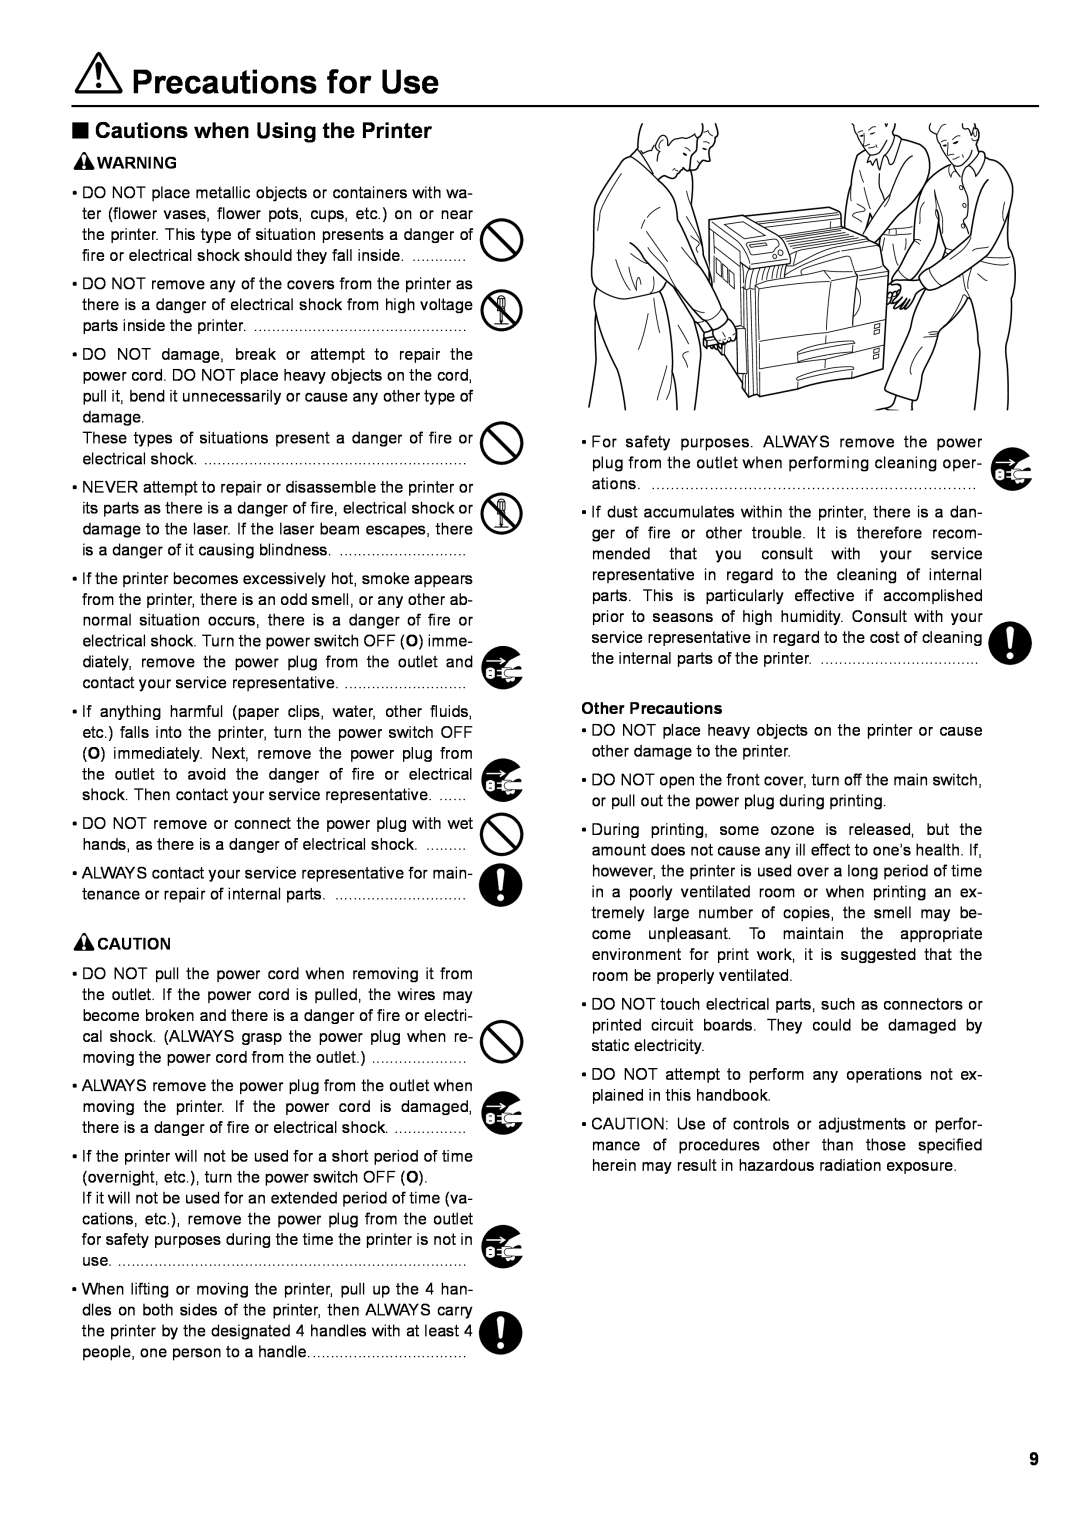 Kyocera S-9100DN manual Precautions for Use, QCautions when Using the Printer, Other Precautions 